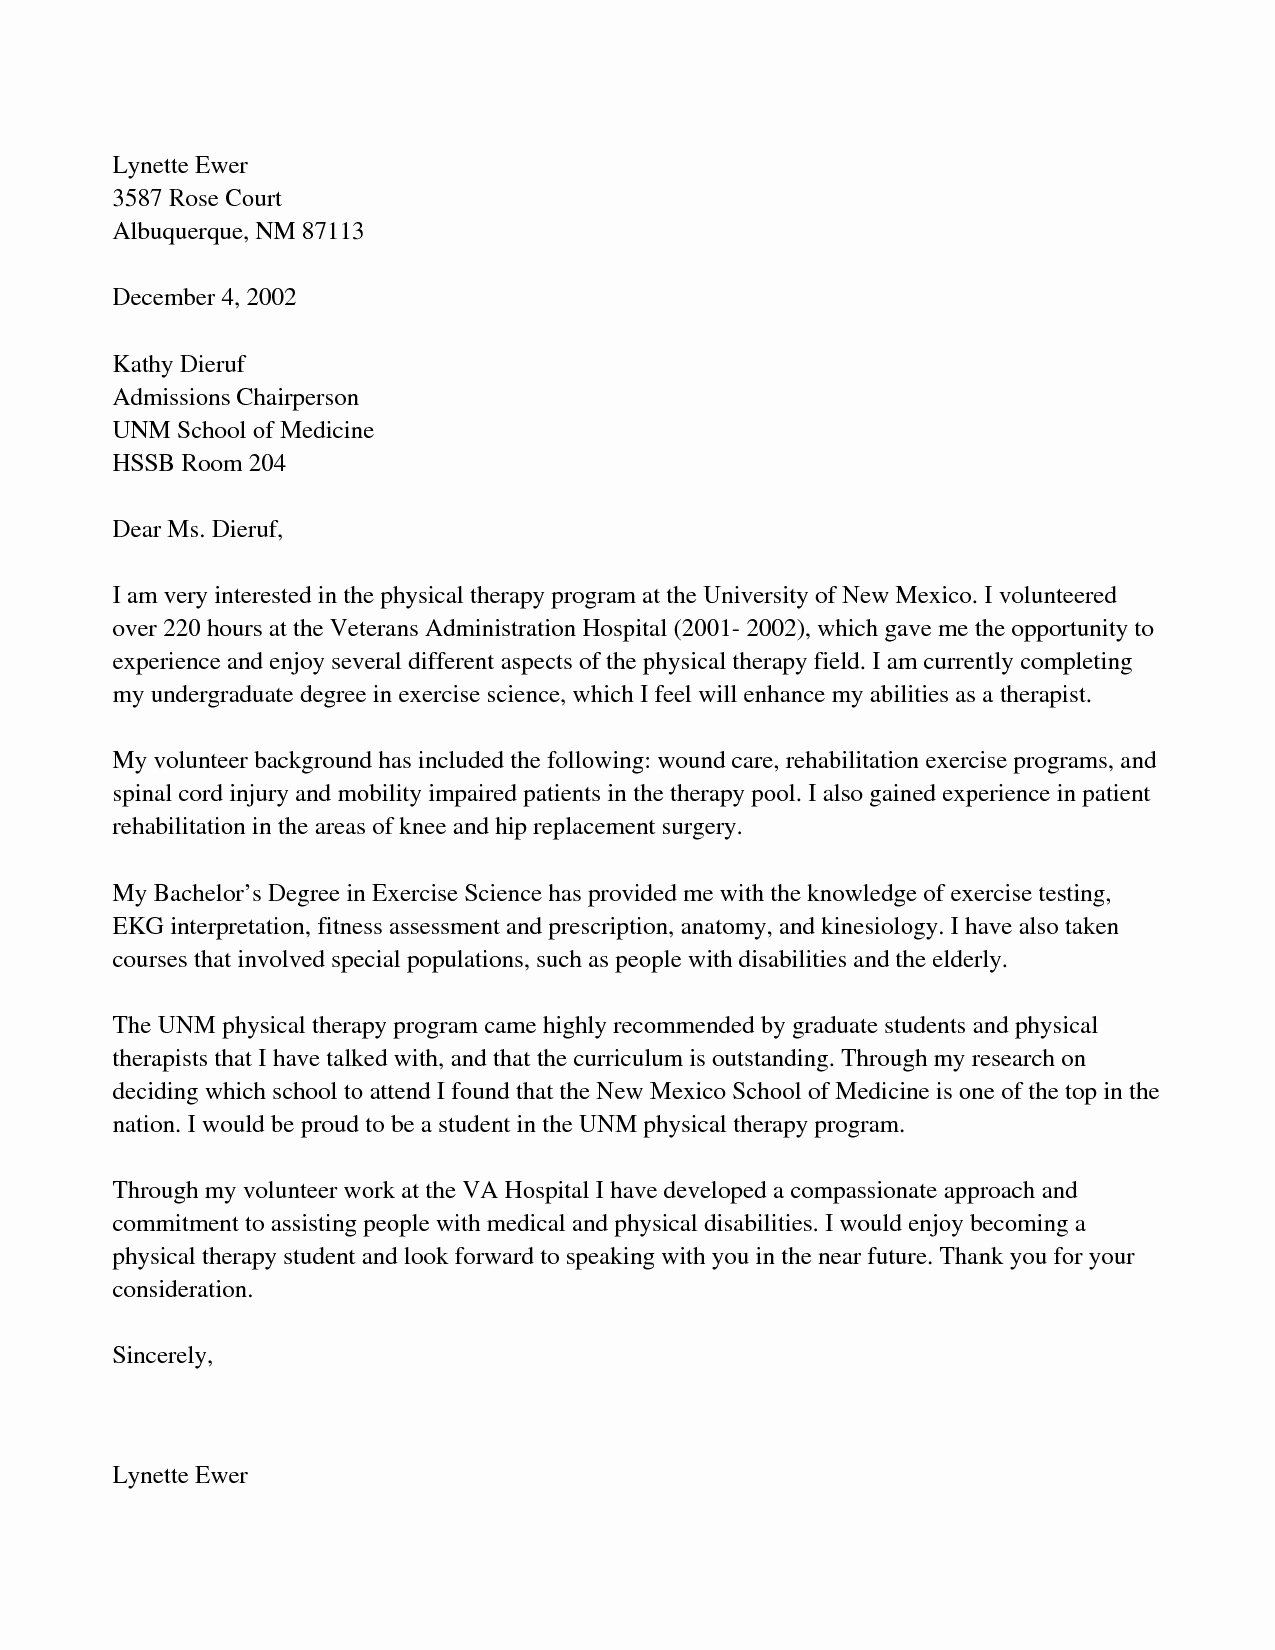 Letter Of Recommendation Pa School Beautiful Letter Re Mendation for Physical therapy School